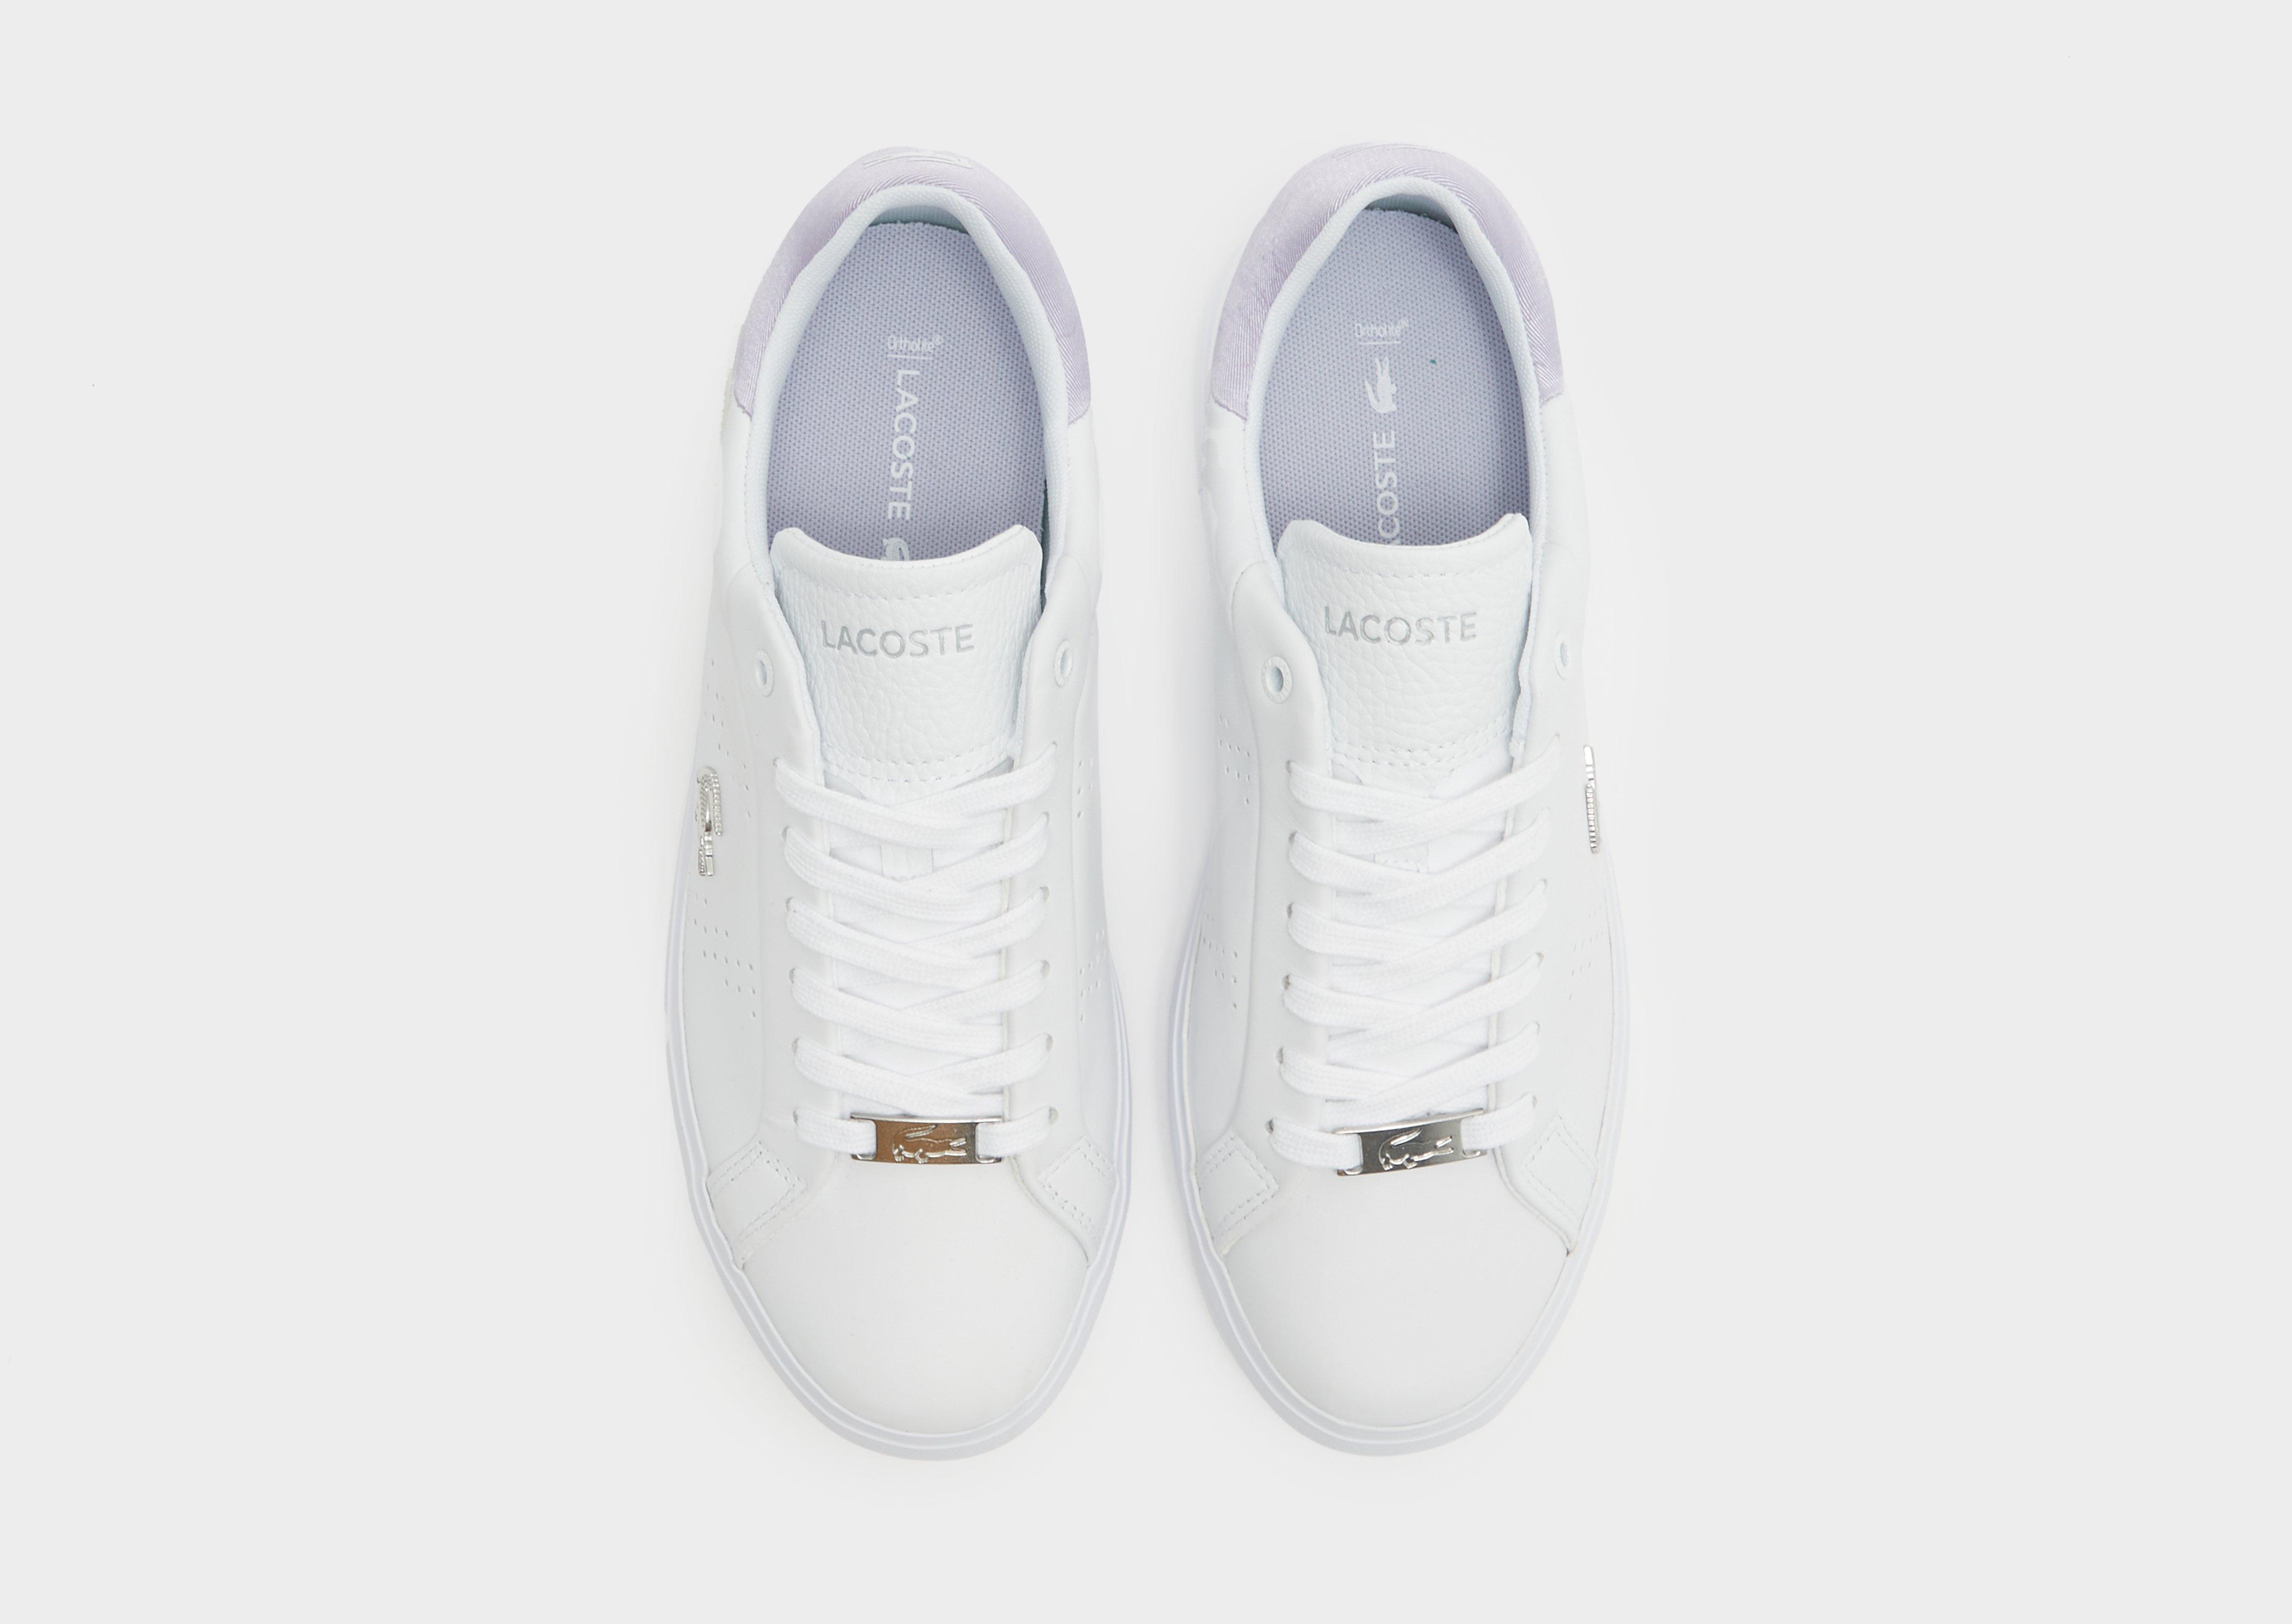 brysomme fad Lighed Hvid Lacoste Powercourt dame - JD Sports Danmark